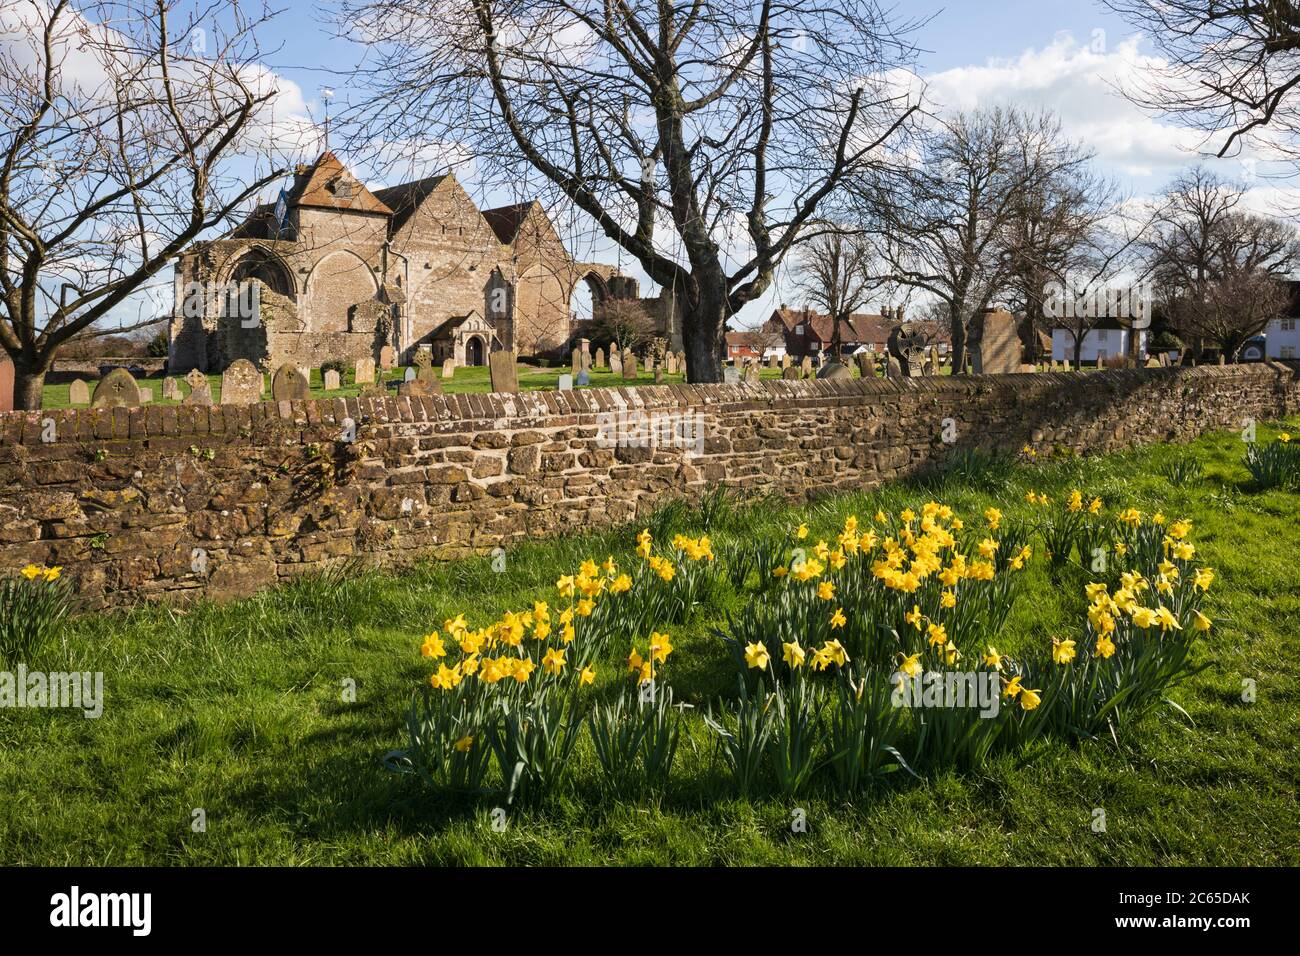 St Thomas the Martyr church with spring Daffodils, Winchelsea, East Sussex, England, United Kingdom, Europe Stock Photo